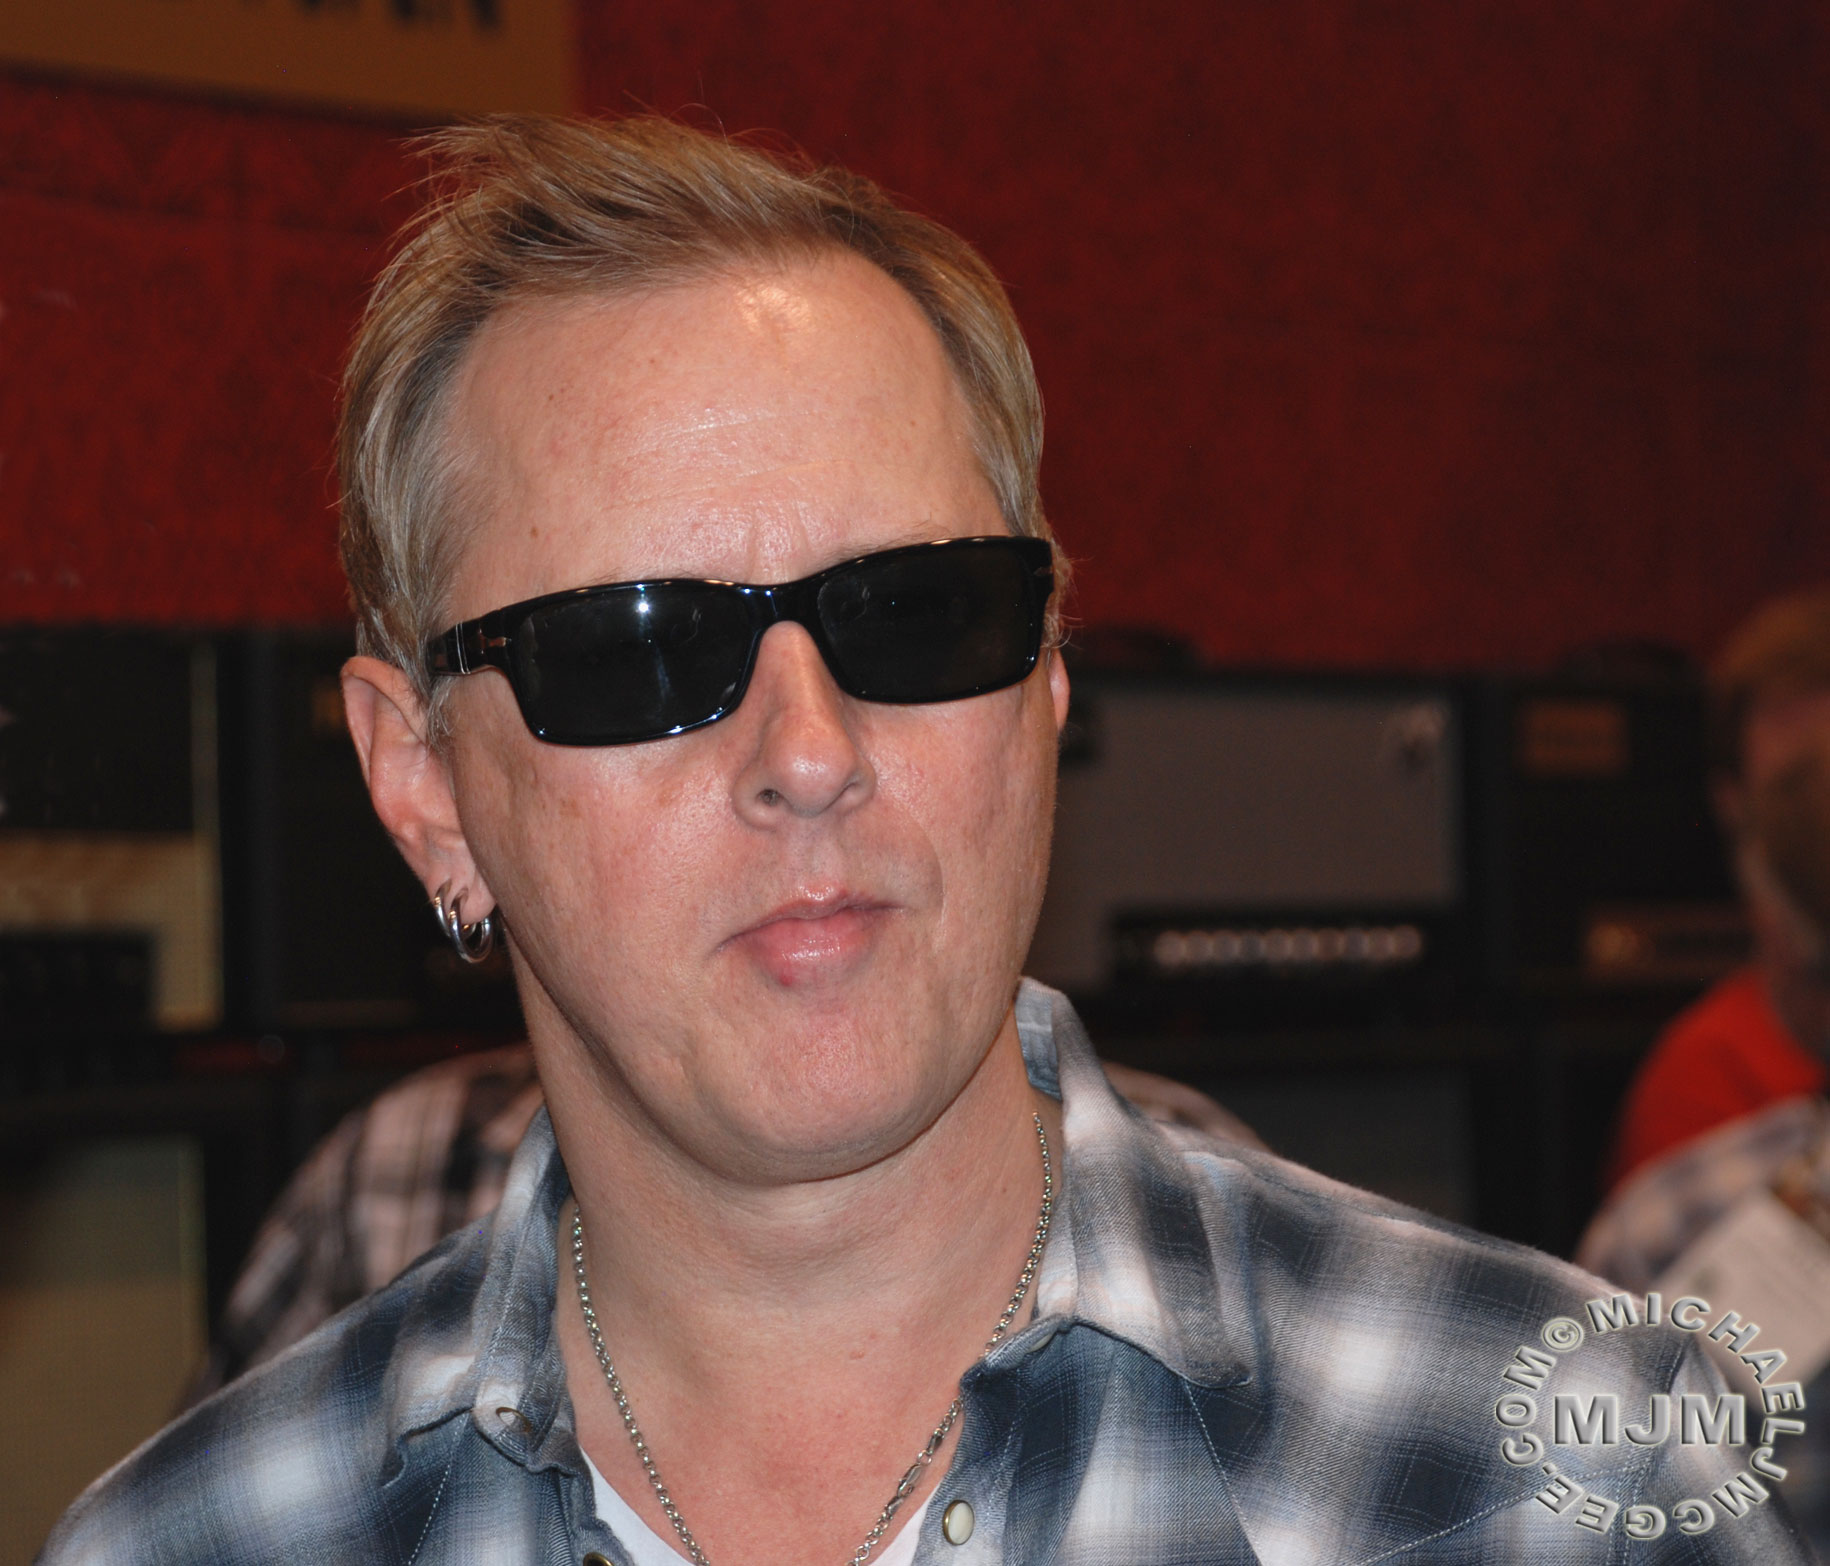 Jerry Cantrell / michaeljmcgee.com